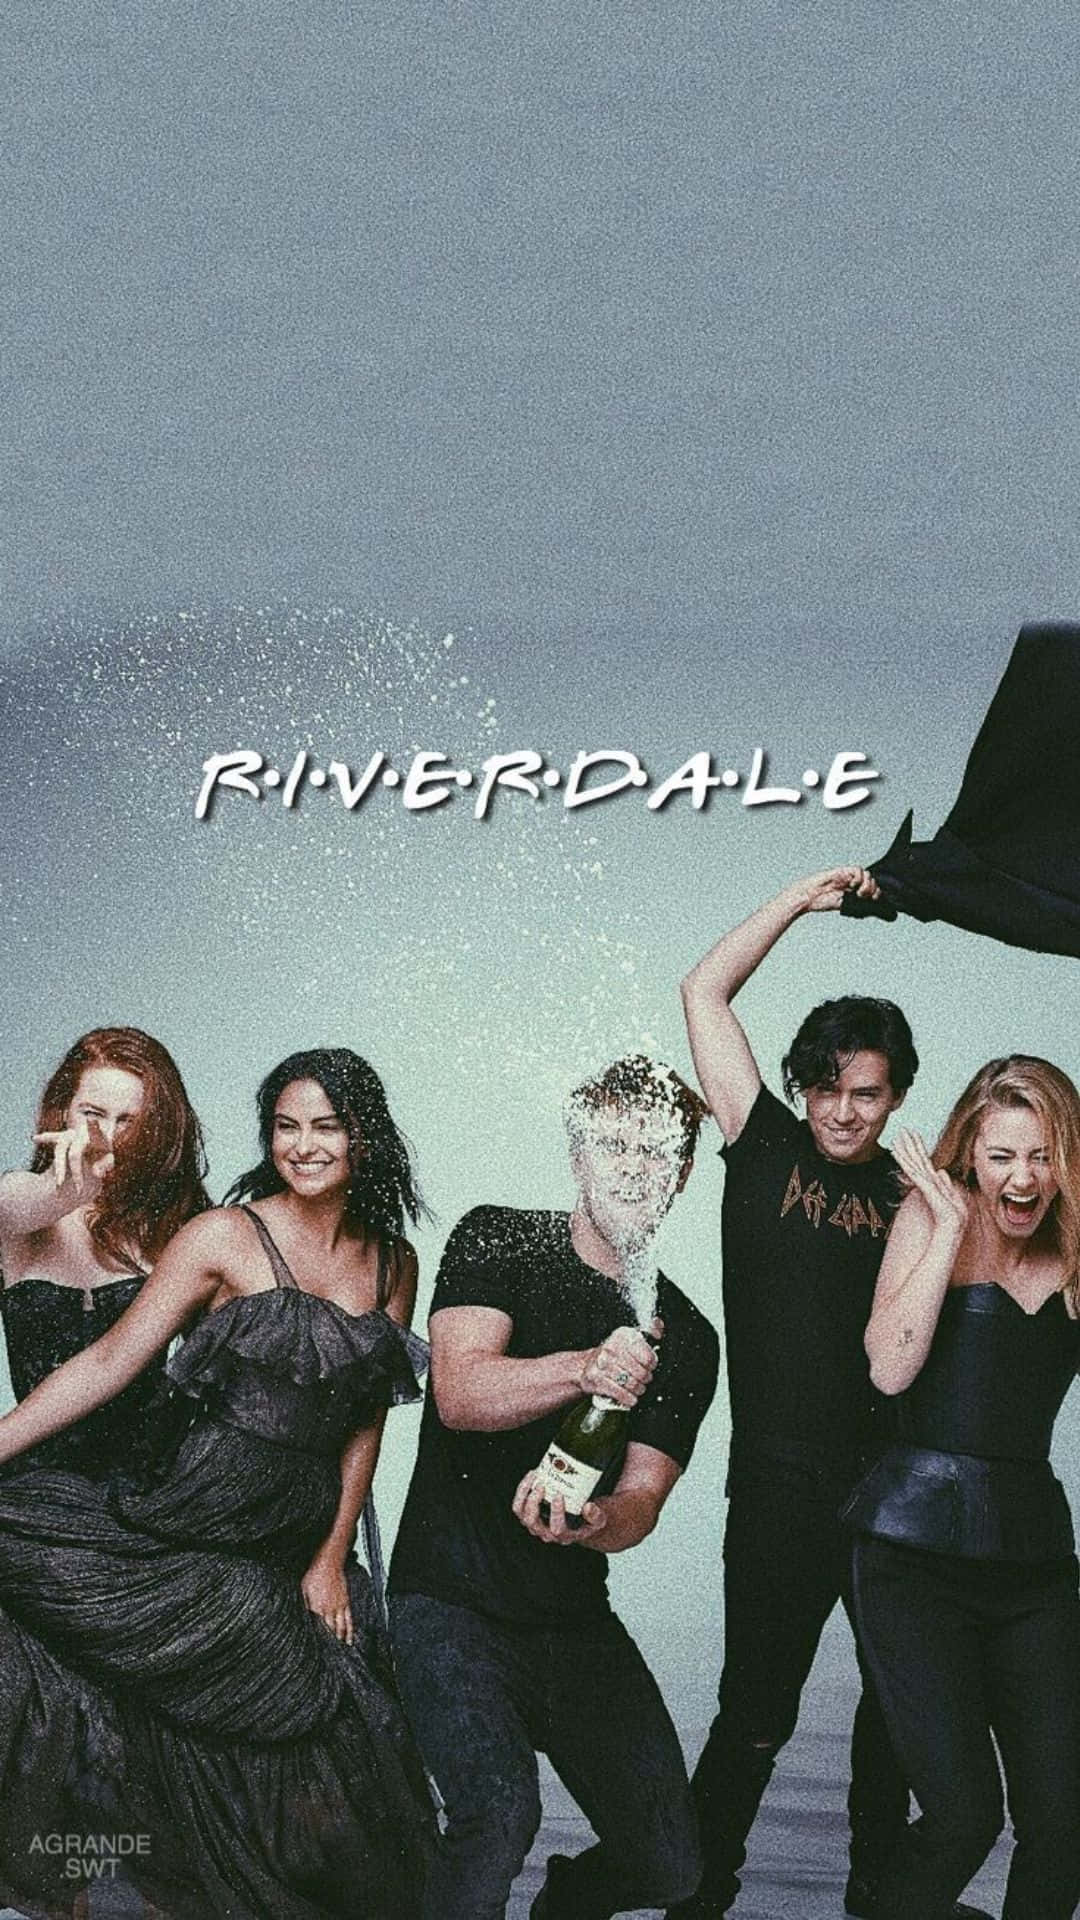 Riverdale High - The Heart of Mystery and Adventure